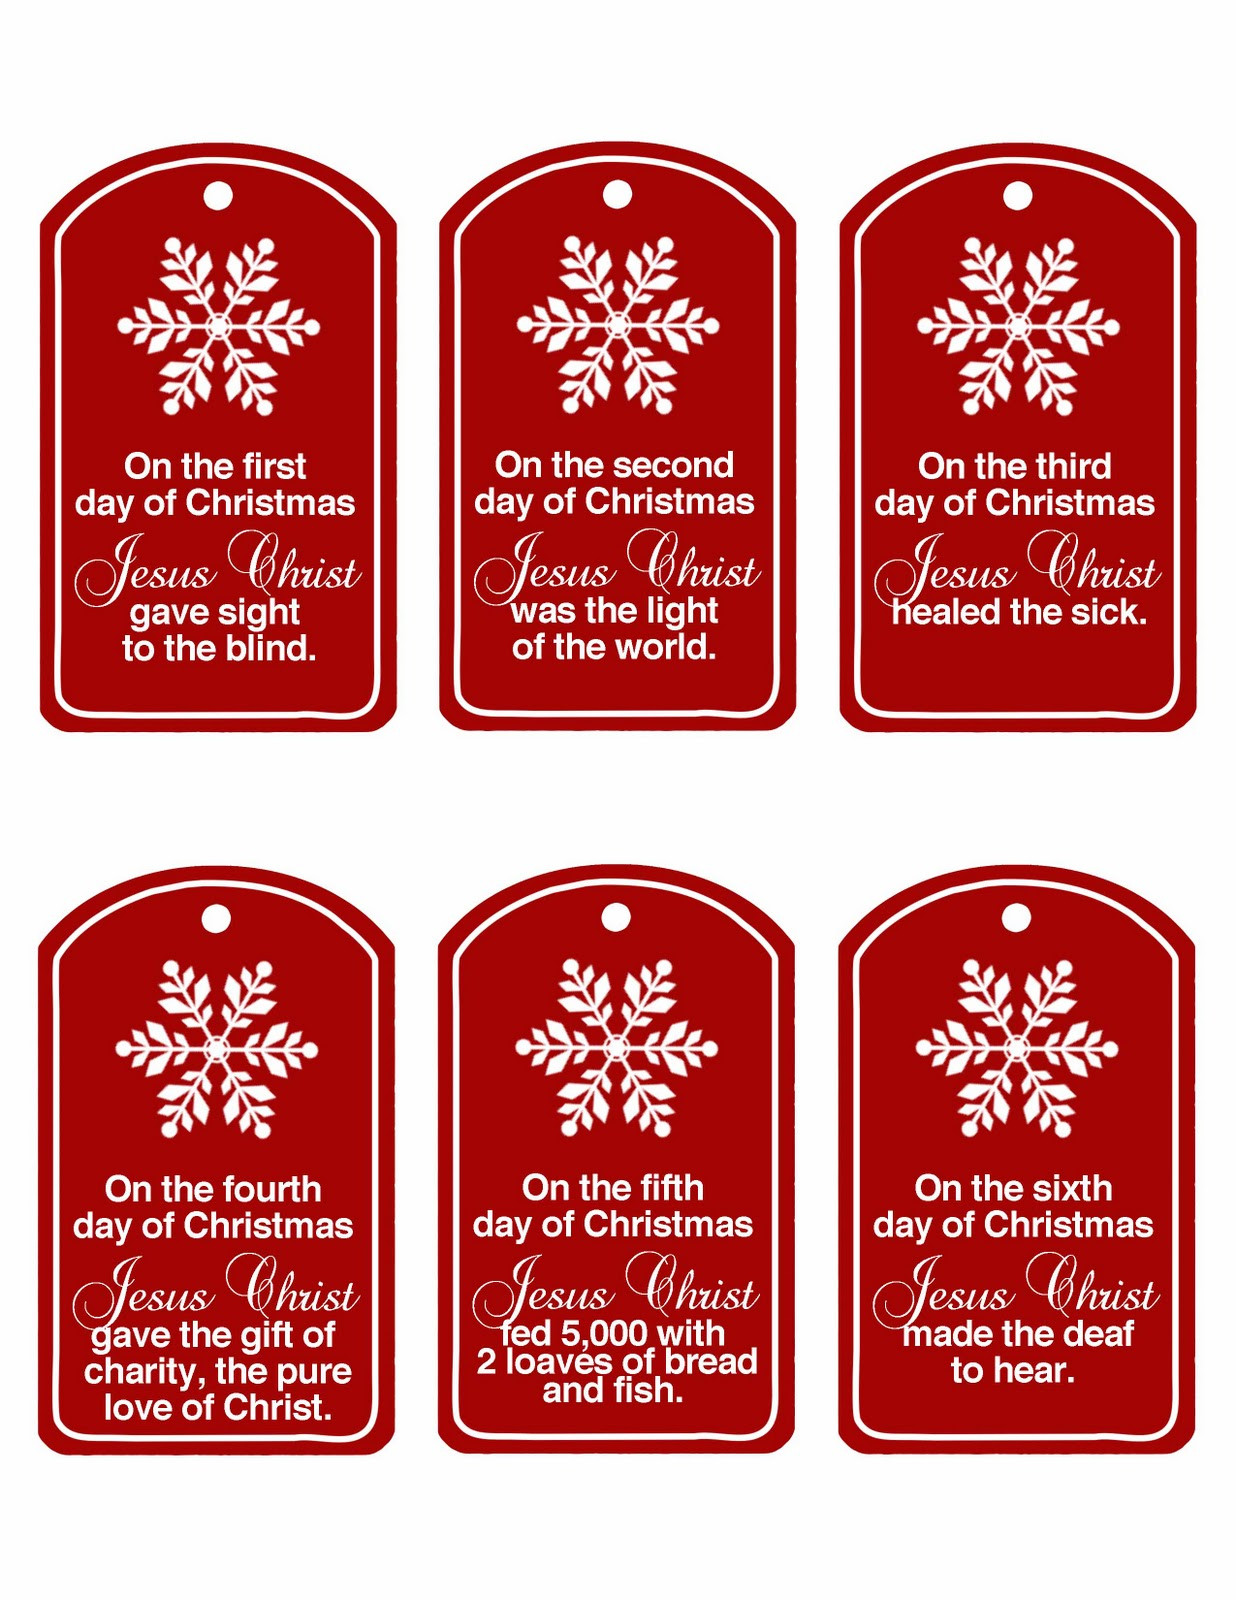 12 Days Of Christmas Gift Ideas For Friends
 Family Home Fun Christ Centered 12 Days of Christmas